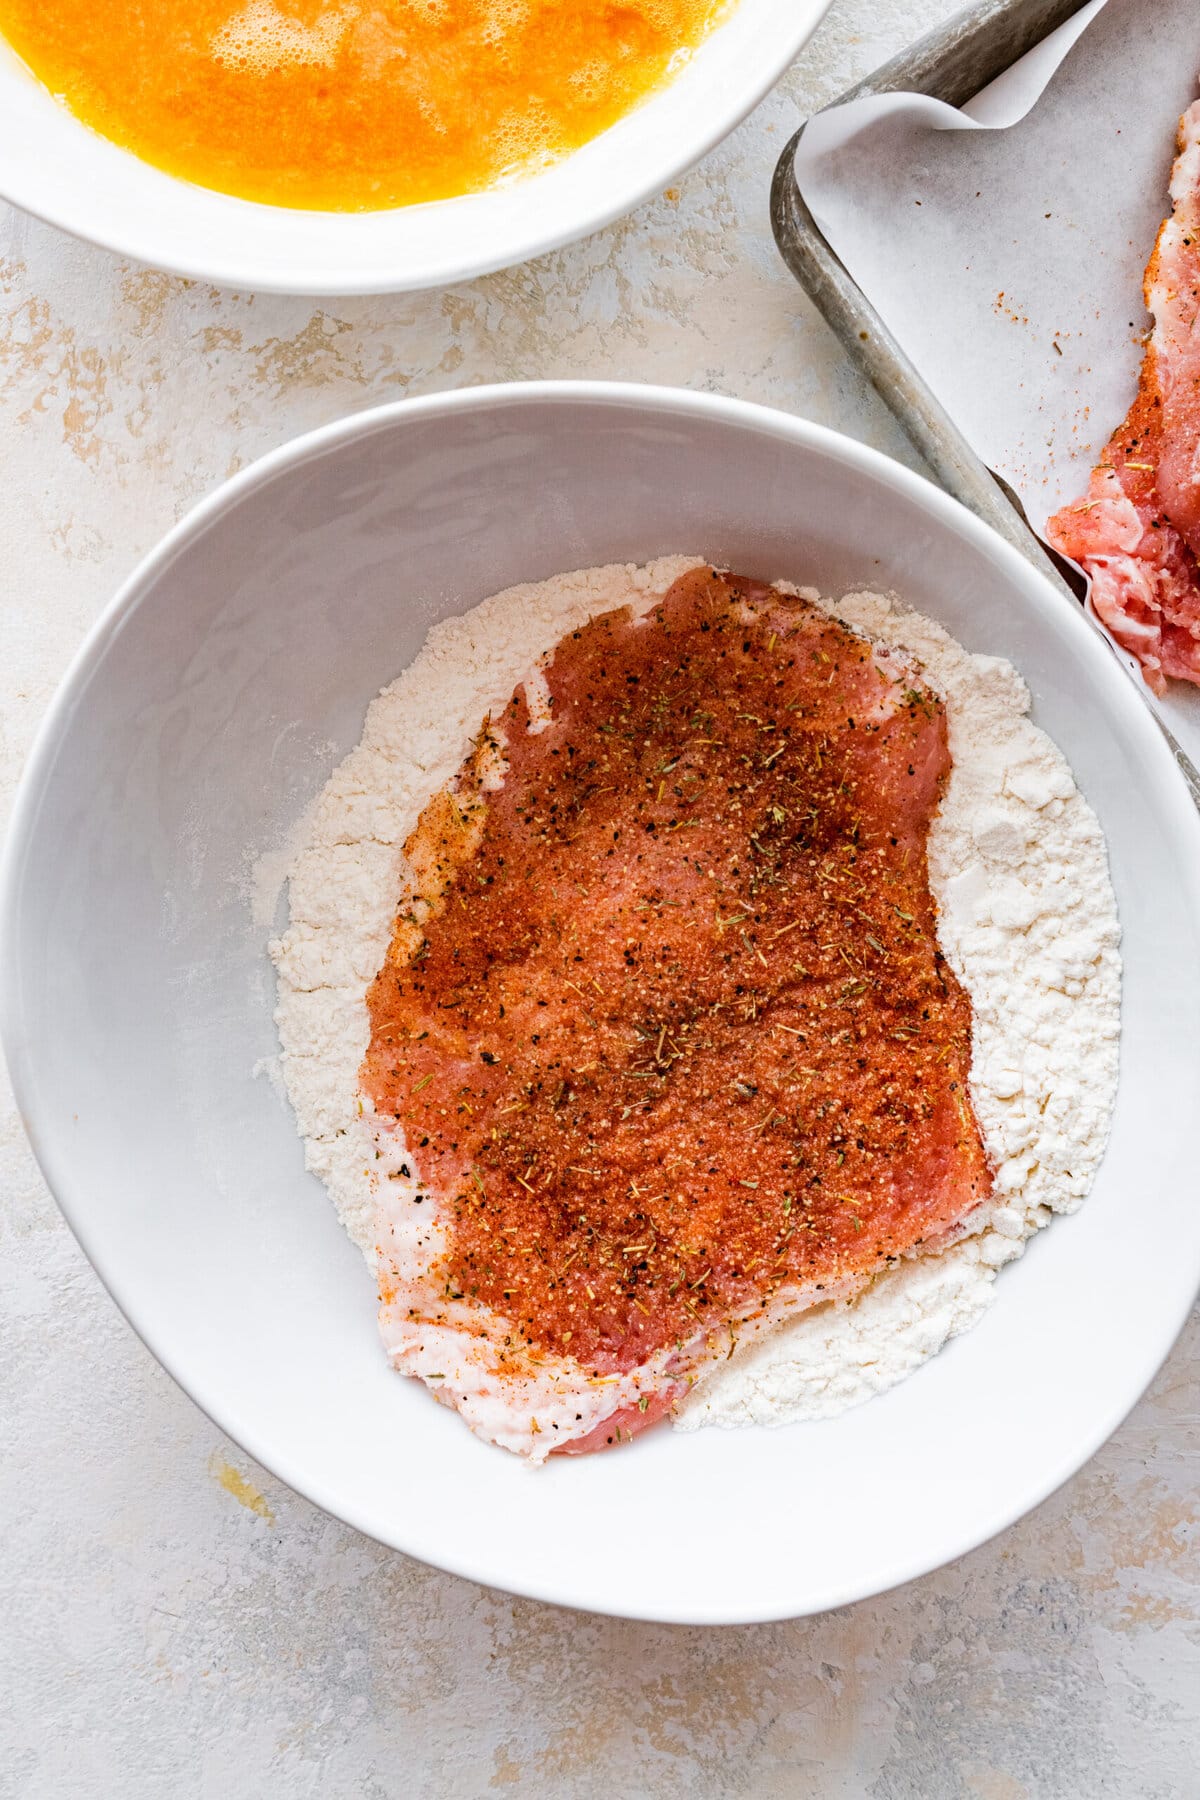 How to make crispy fried pork chops (step-by-step instructions)- coating the pork in flour.